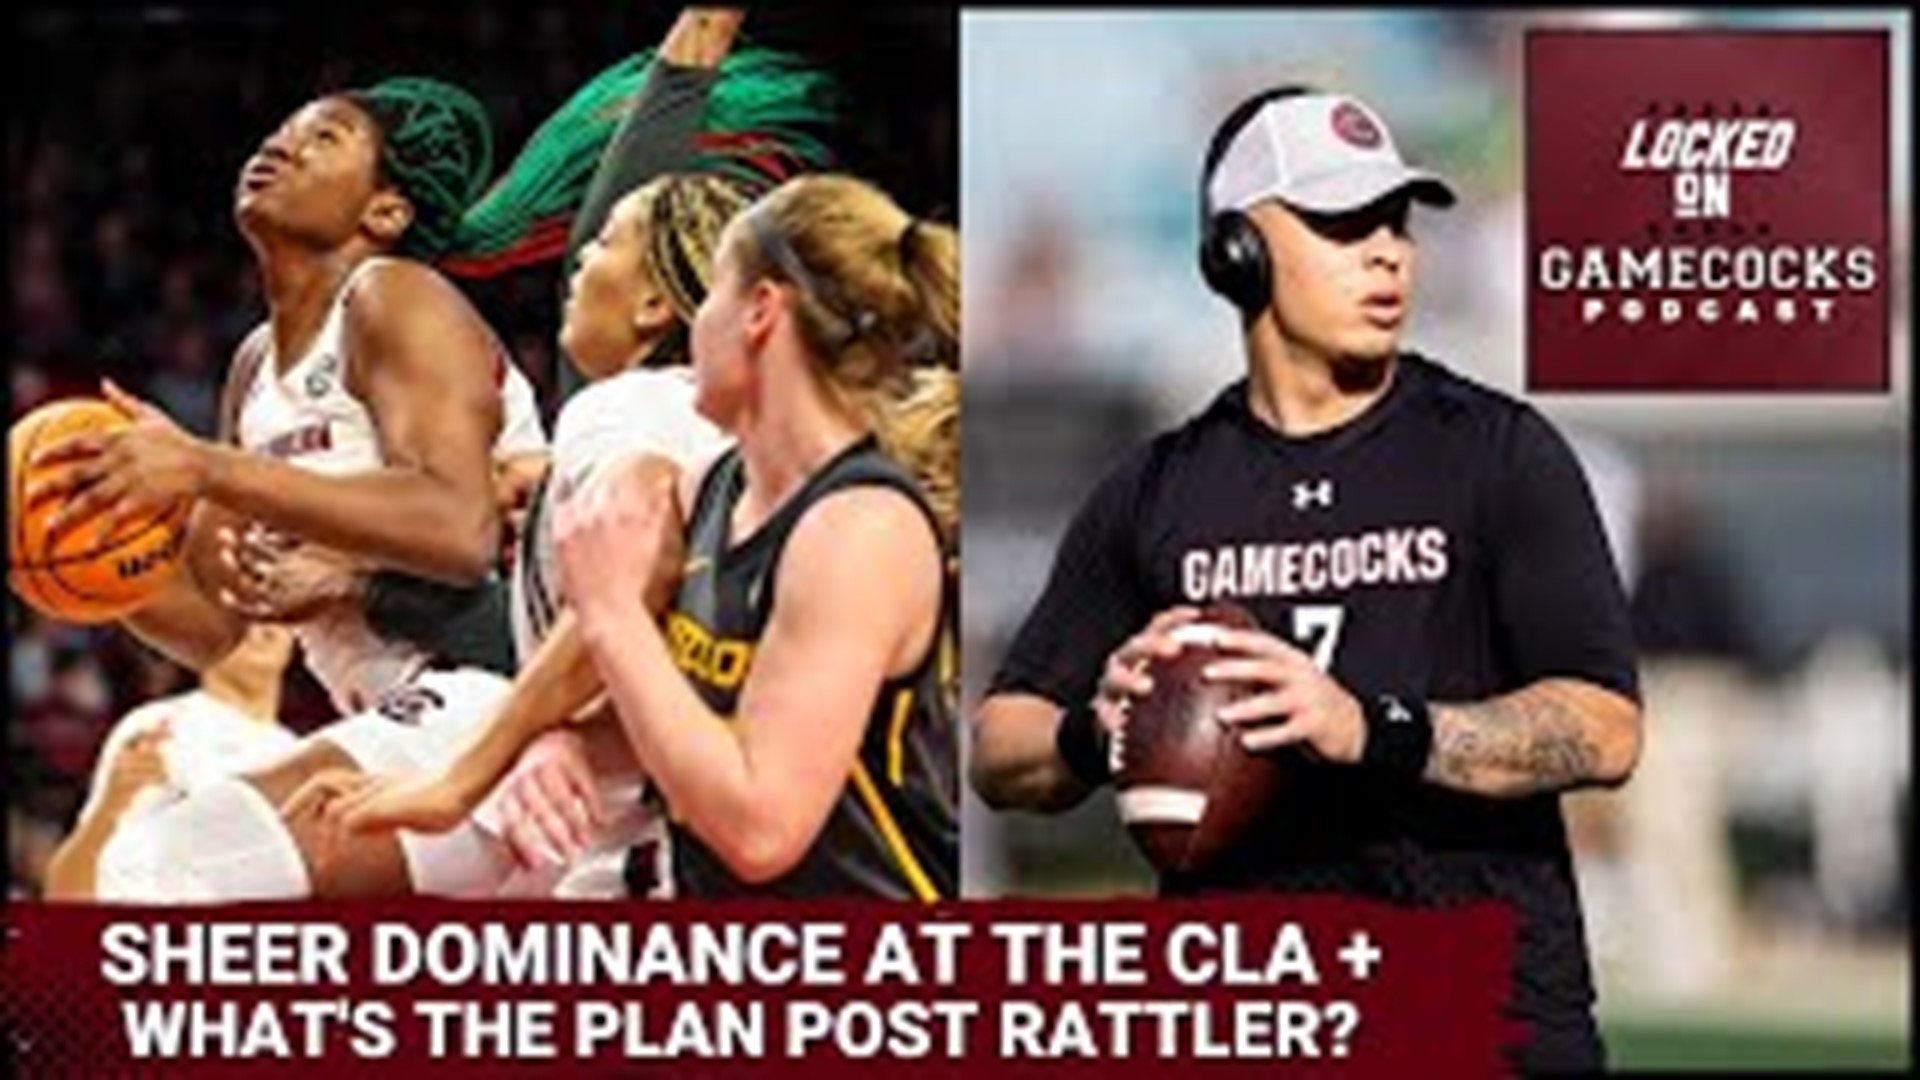 Andrew talks about the Gamecocks' WBB team avenging last year's loss against Missouri and what the post Spencer Rattler era might look like.